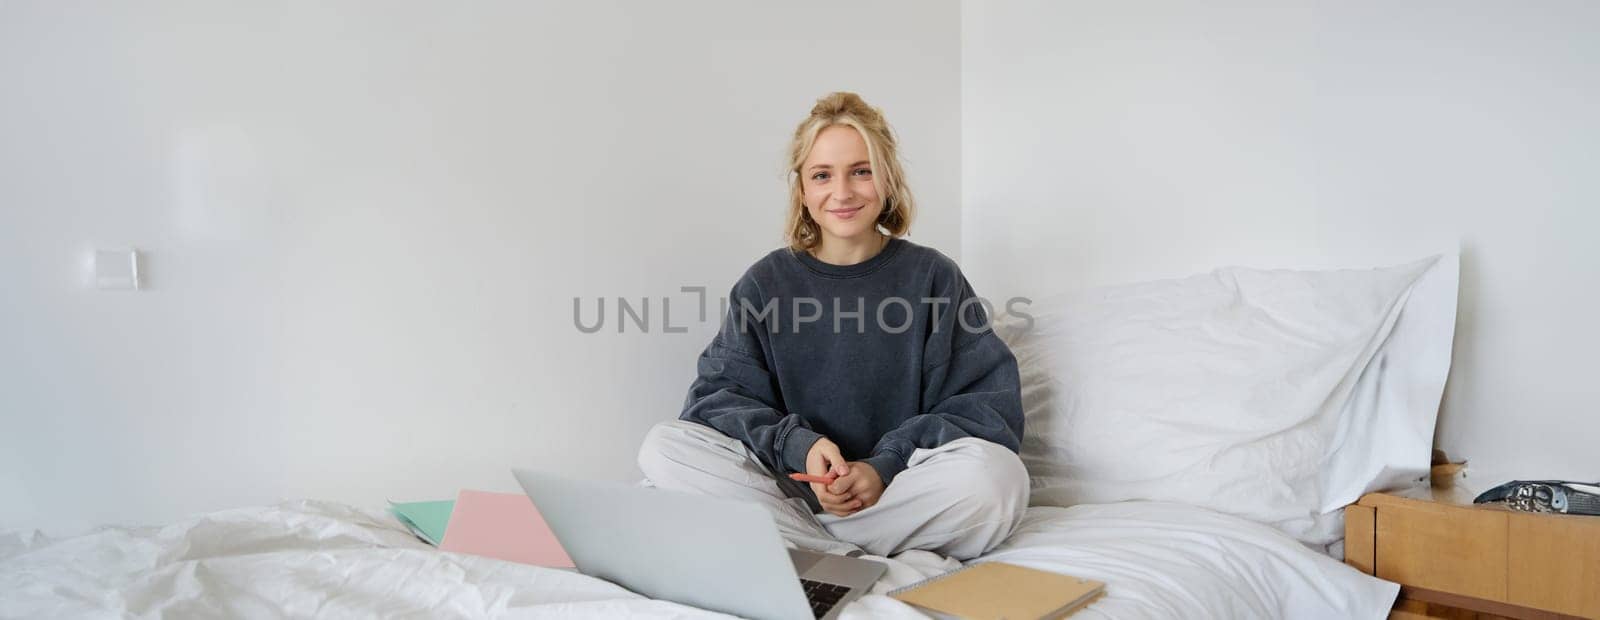 Portrait of happy blond woman, freelancer working from home, sitting on bed with laptop and notebooks. Student doing homework in bedroom, connects to online class via video chat.